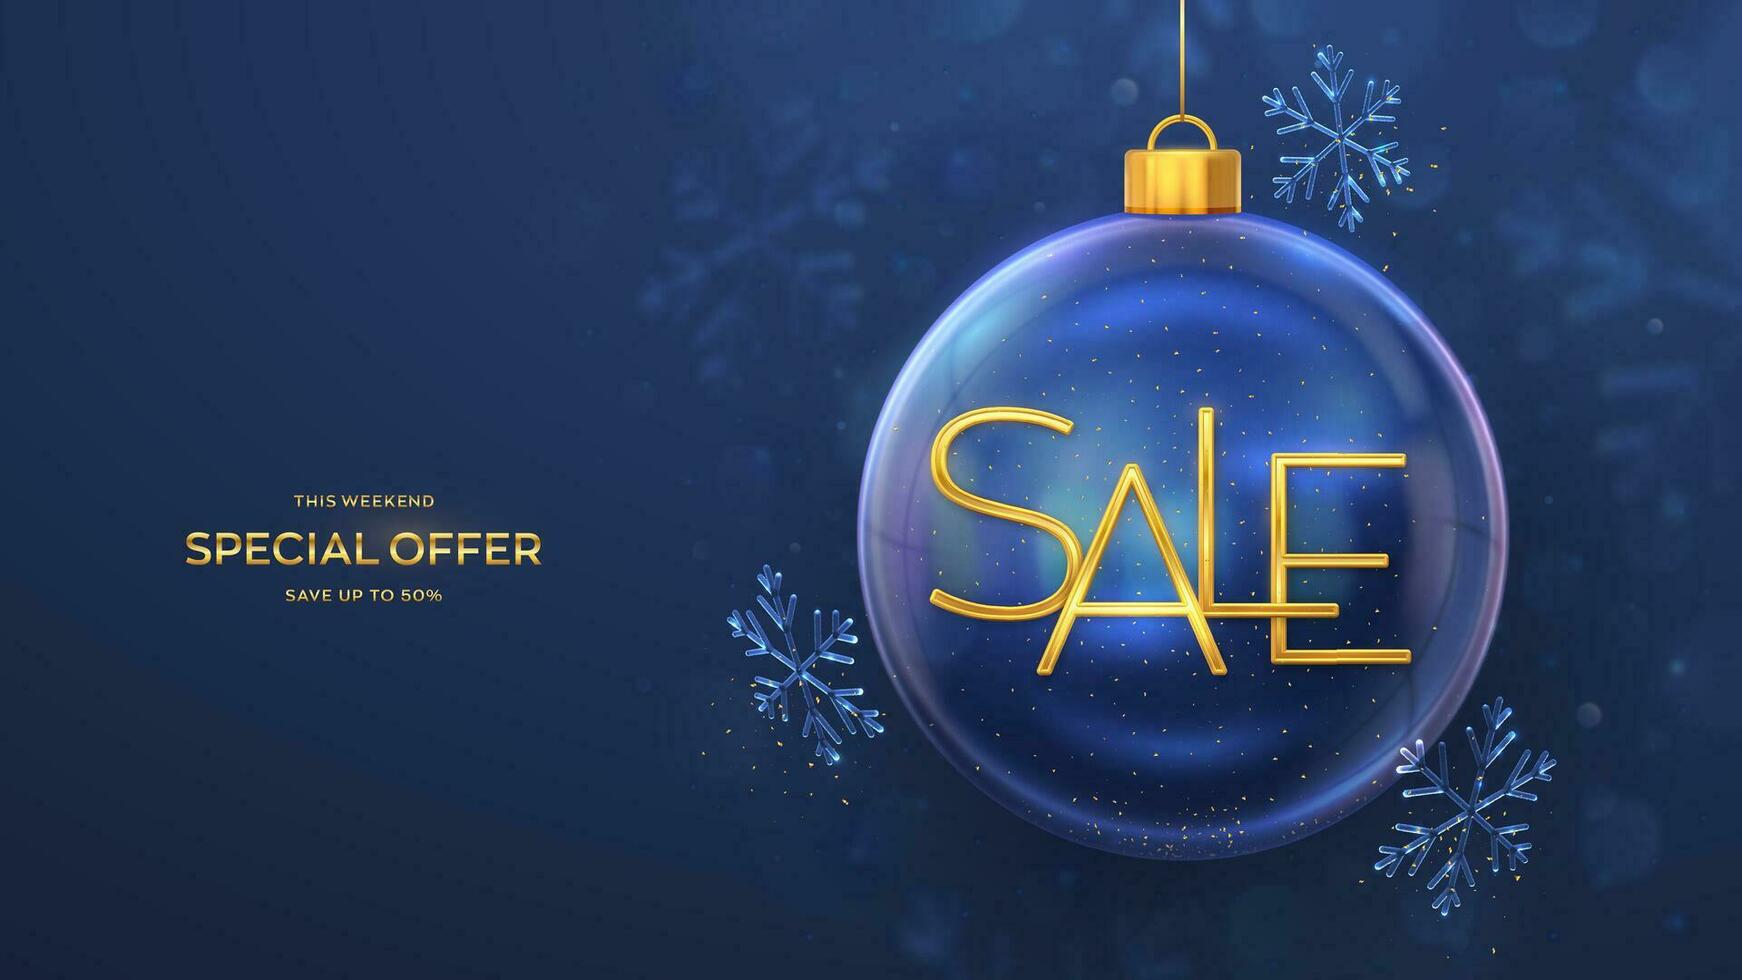 Christmas sale banner design. Golden metallic Sale letters in a transparent glass ball. Shining showflakes, confetti. New Year Xmas blue background. Advertising poster, flyer. Vector illustration.